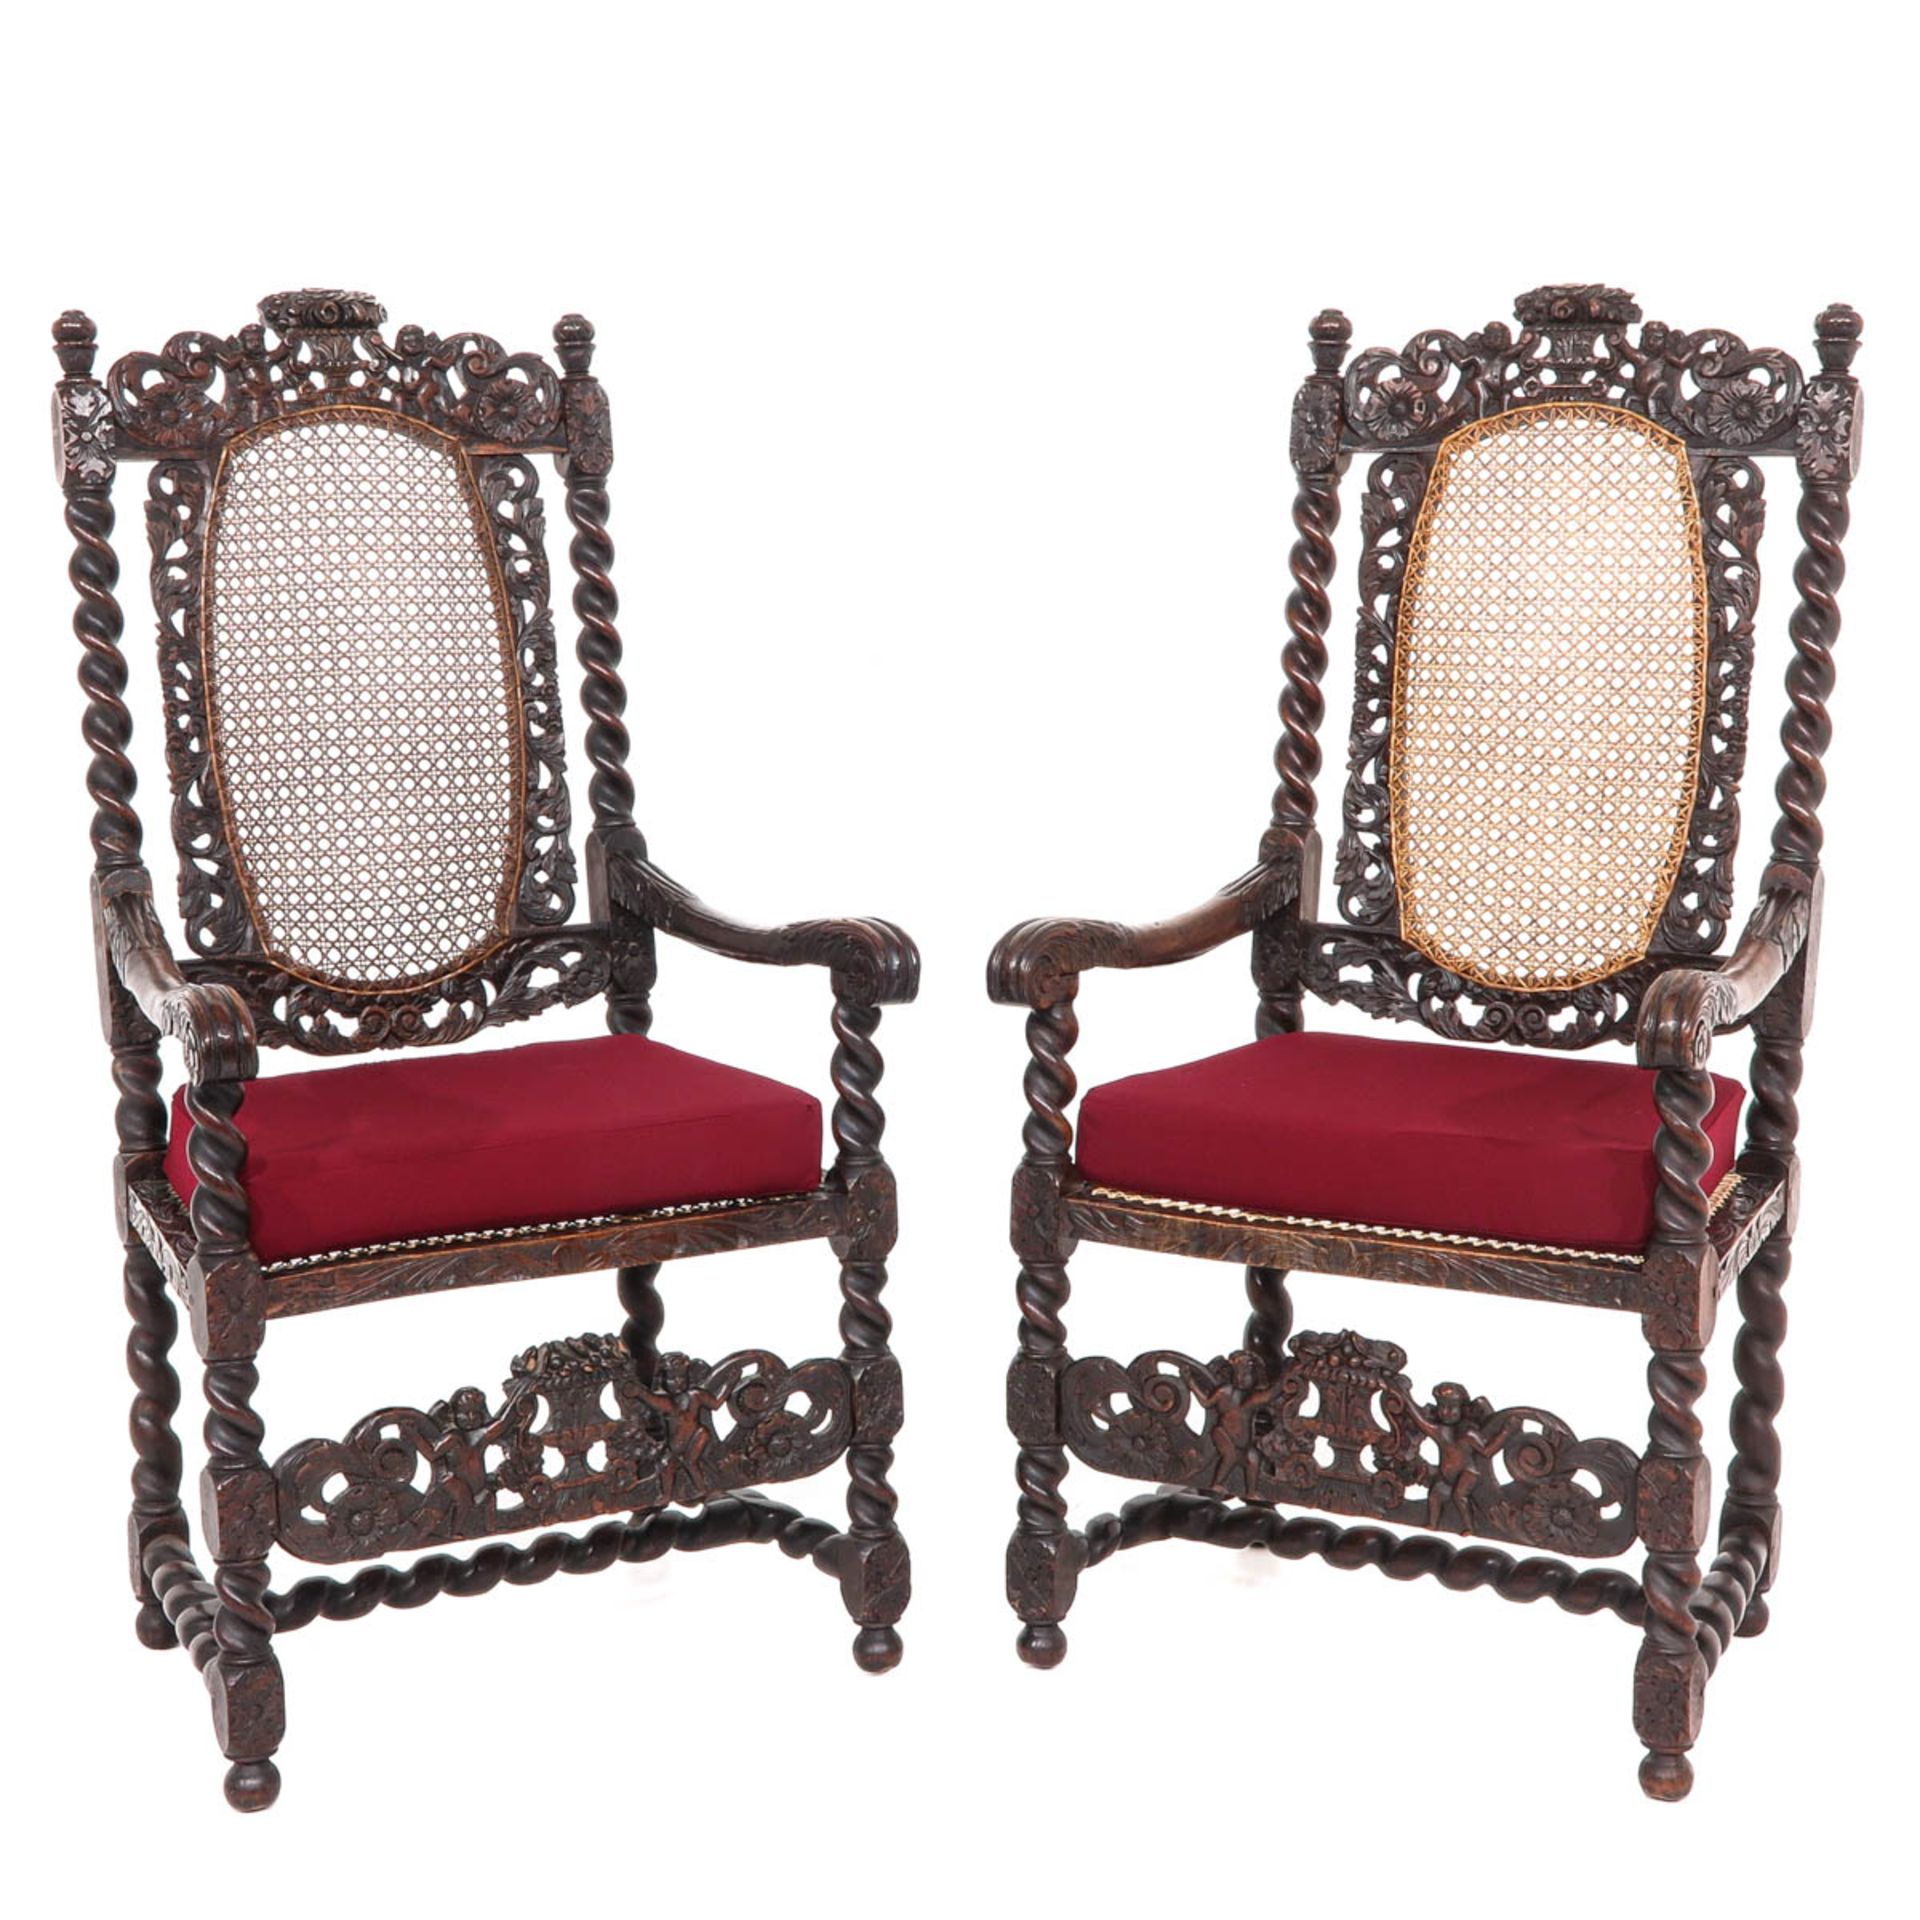 A Pair of William and Mary Chairs